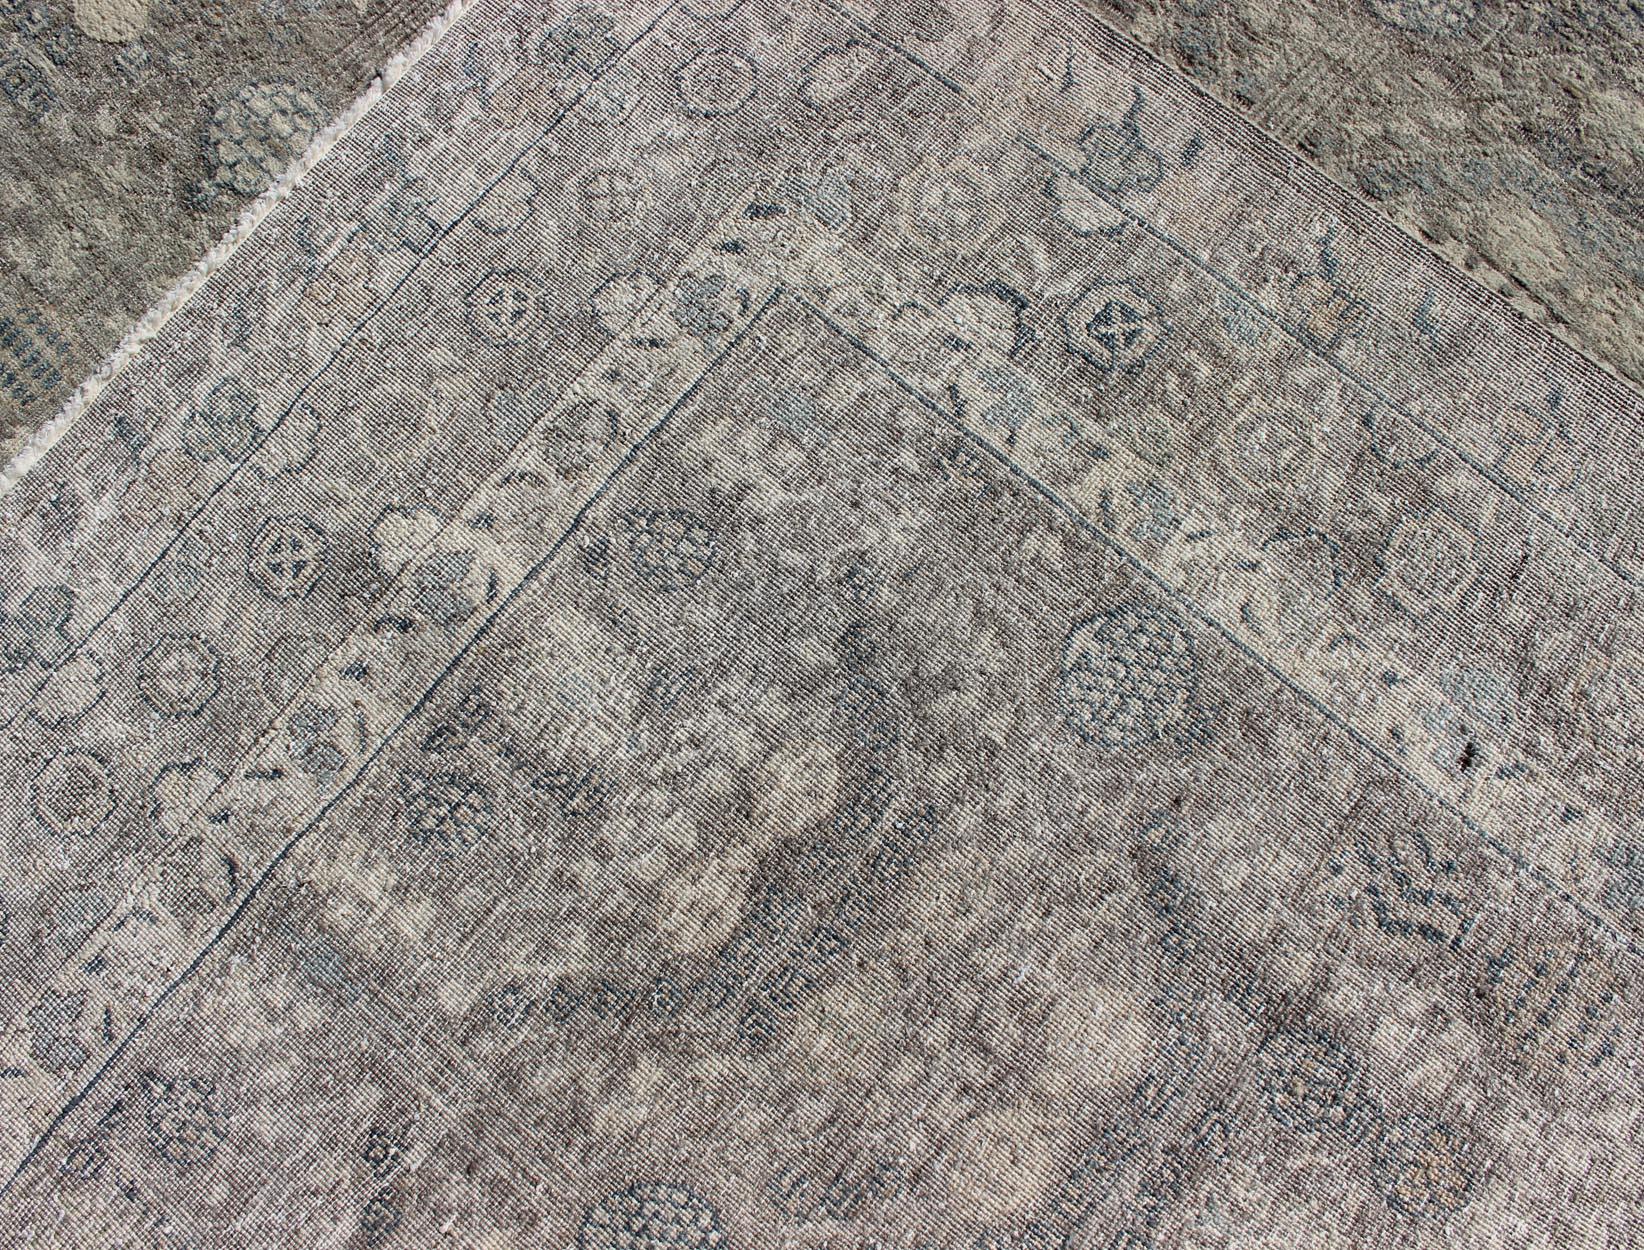 Modern Fine Weave Distressed Tabriz Rug in Taupe, Gray, Blue and Neutral Tones  For Sale 7